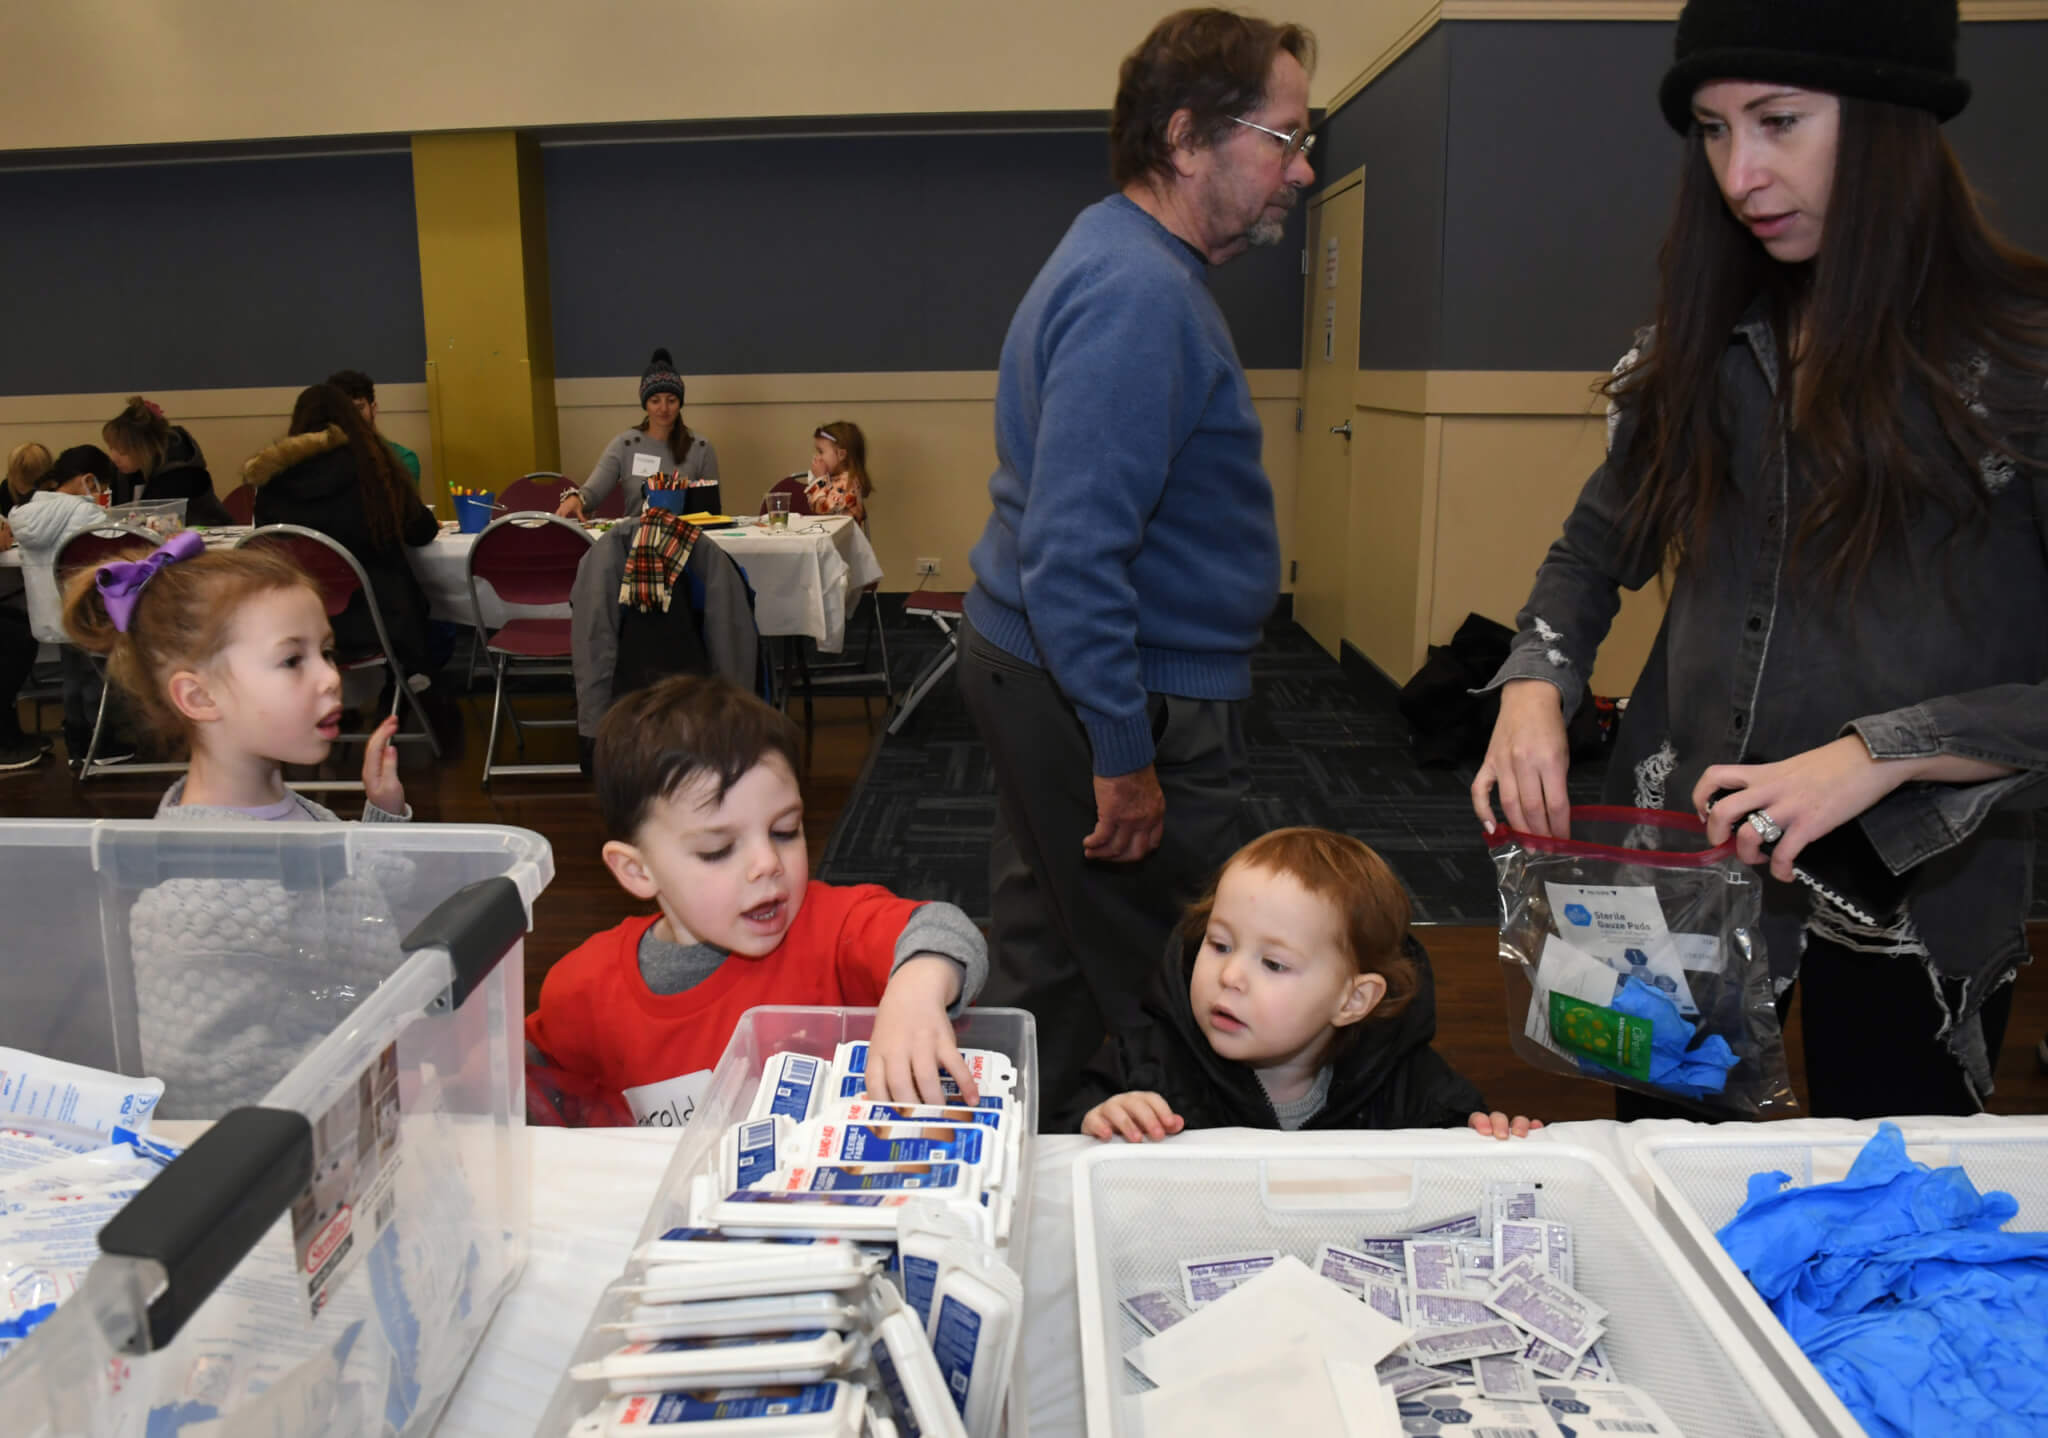 Children help assemble kits at Christmas Mitzvah family site